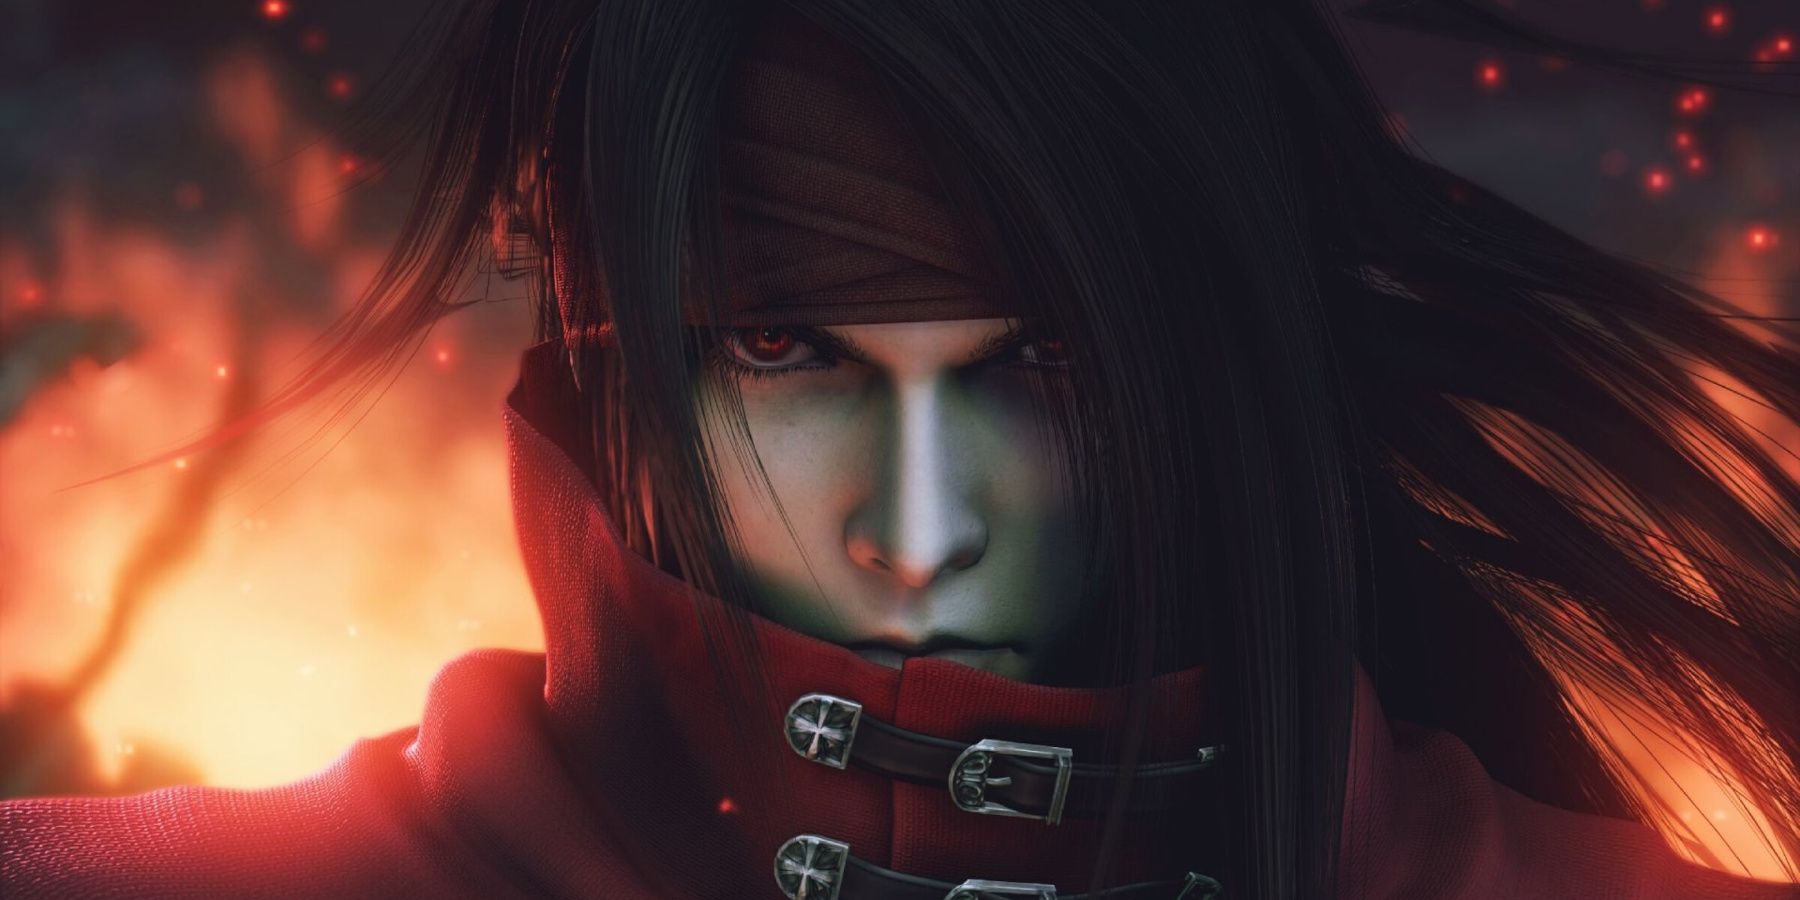 Vincent Valentine from Dirge of Cerberus and Final Fantasy VII